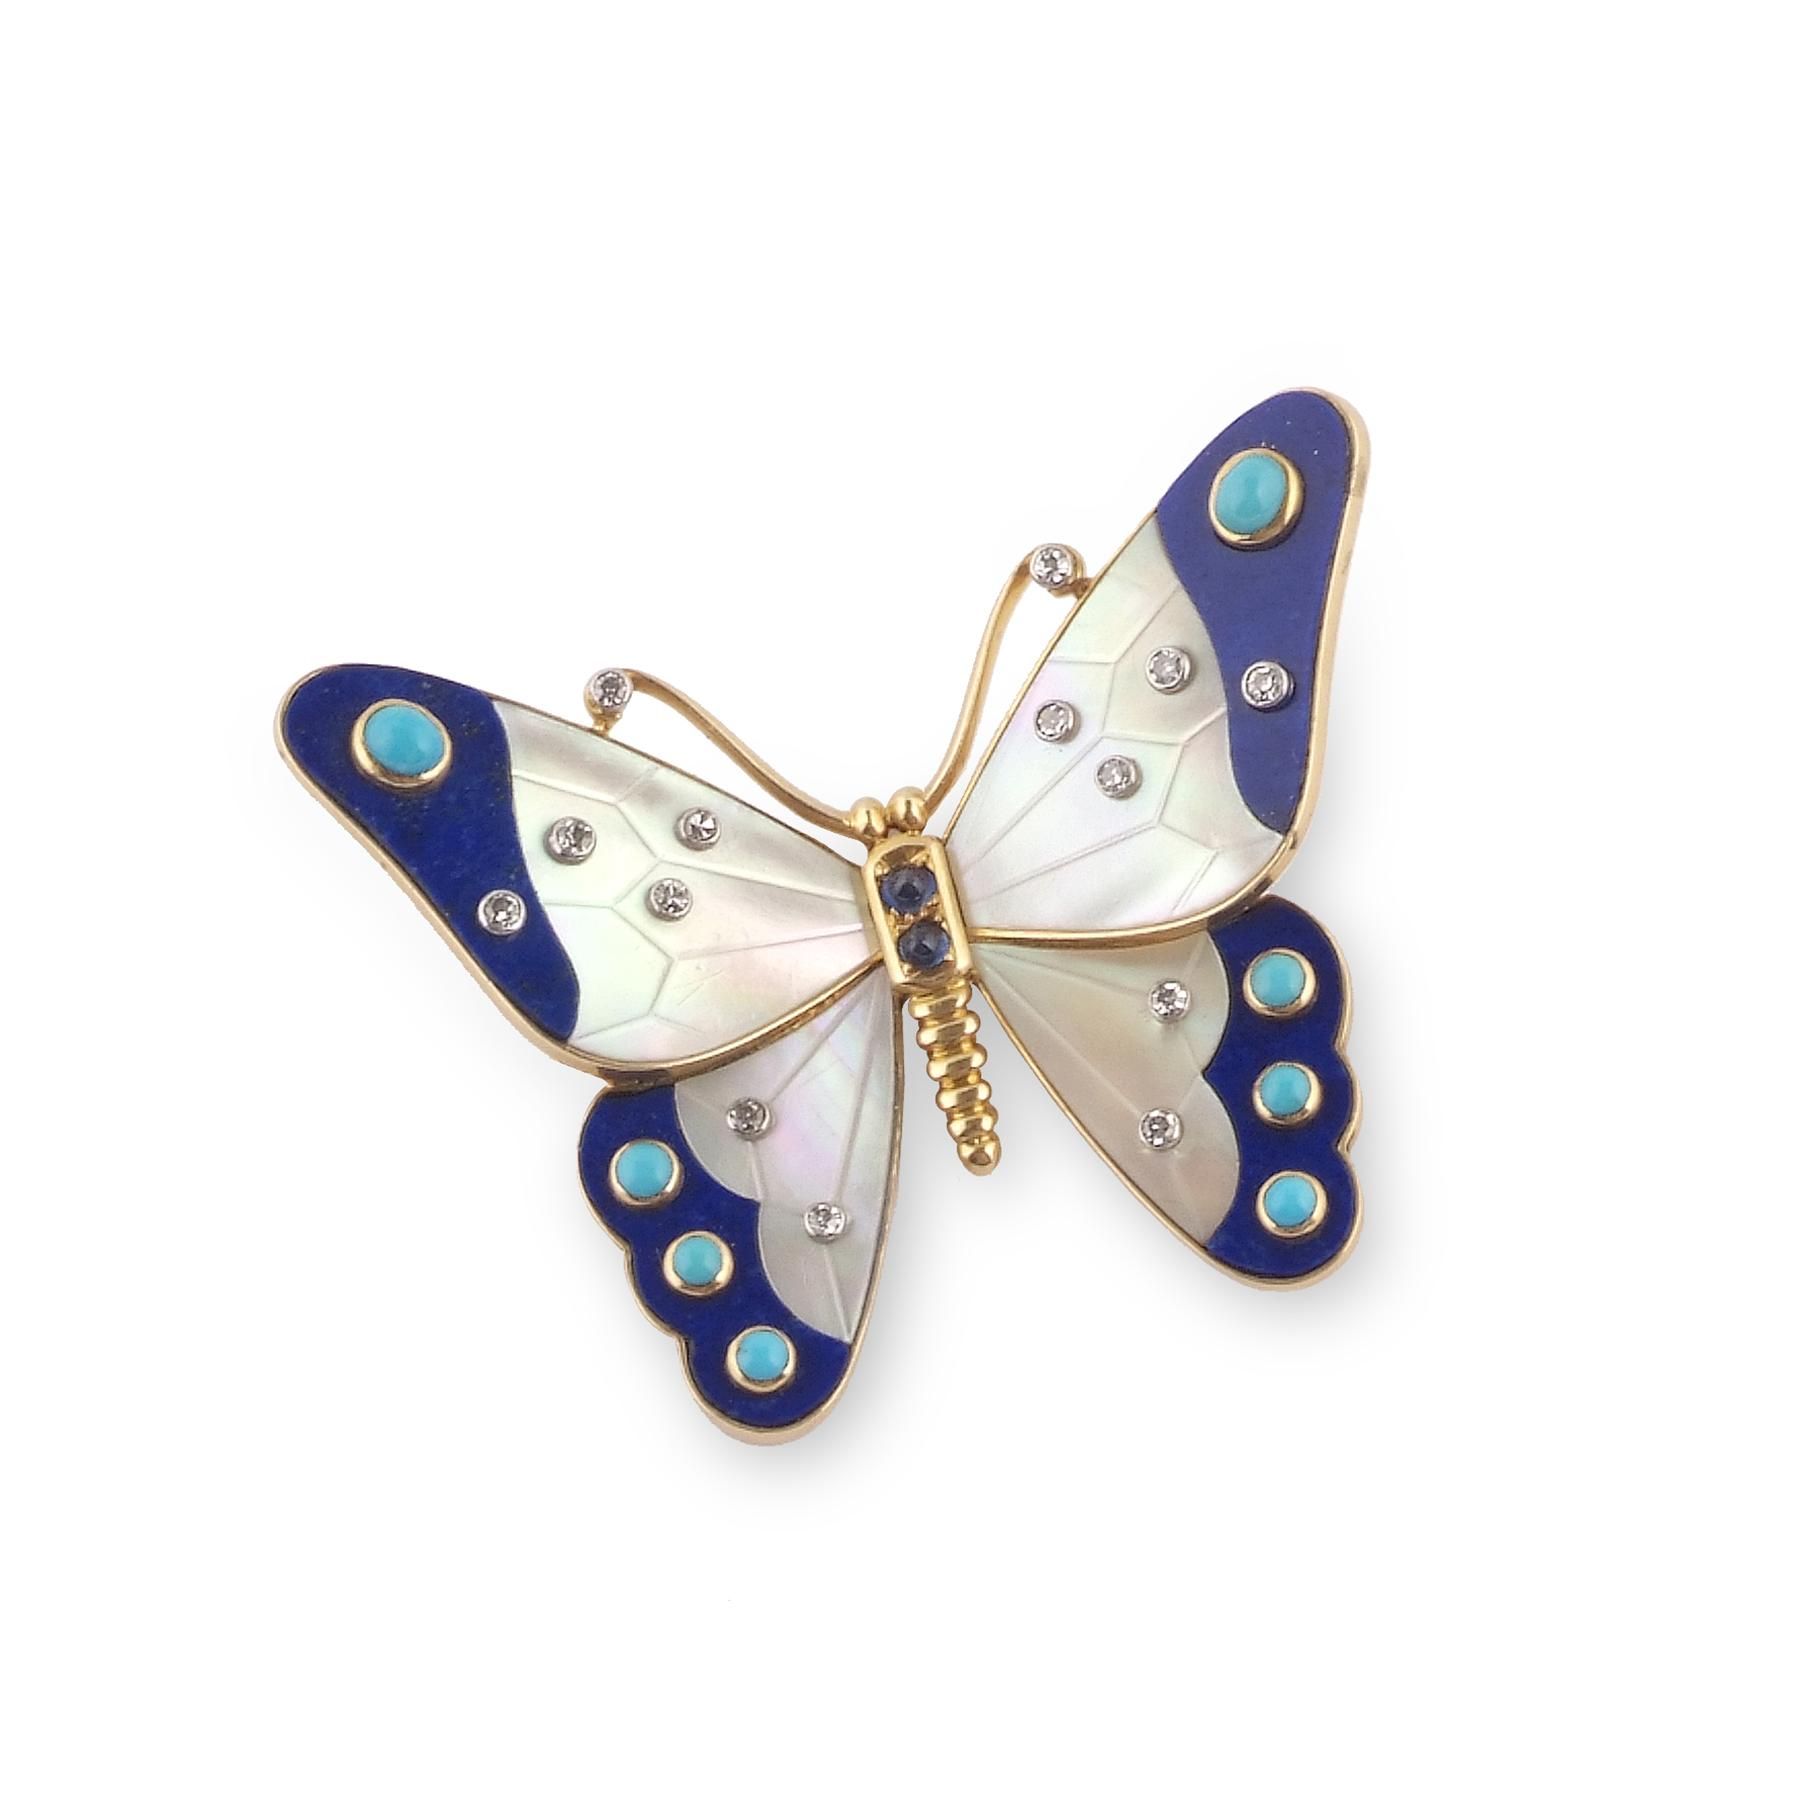 CARTIER. A LAPIS LAZULI, TURQUOISE AND MOTHER-OF-PEARL 'BUTTERFLY' BROOCH. Desig...